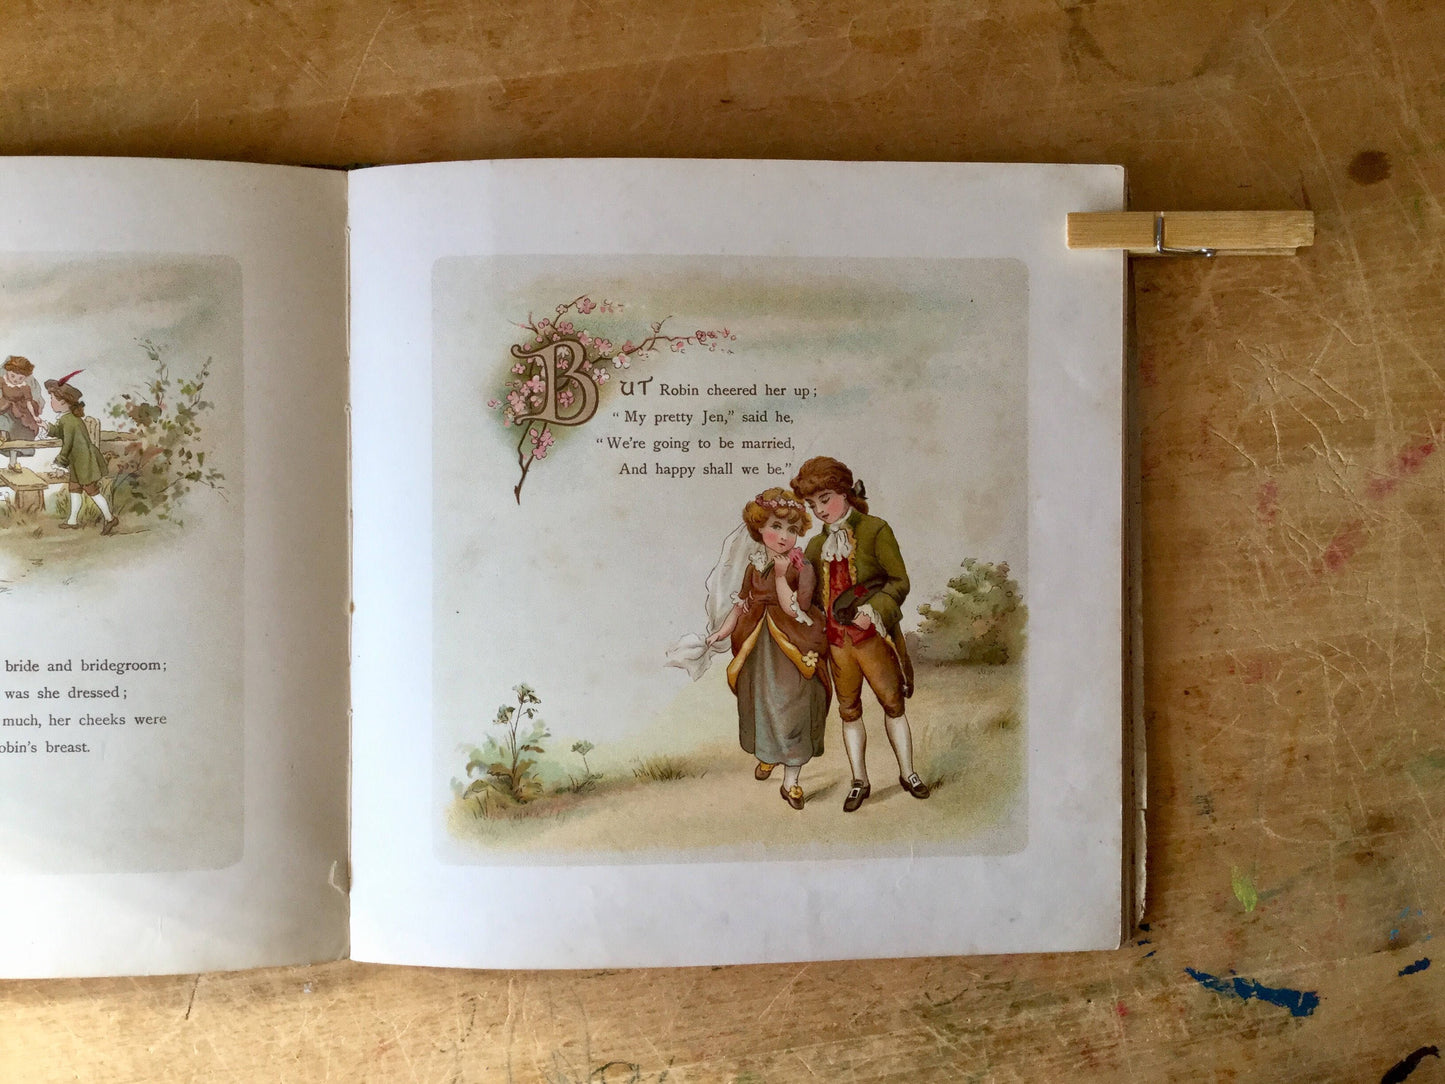 Antique Illustrated Children's Book, The Courtship of C. Robin and J. Wren (c.1800s)